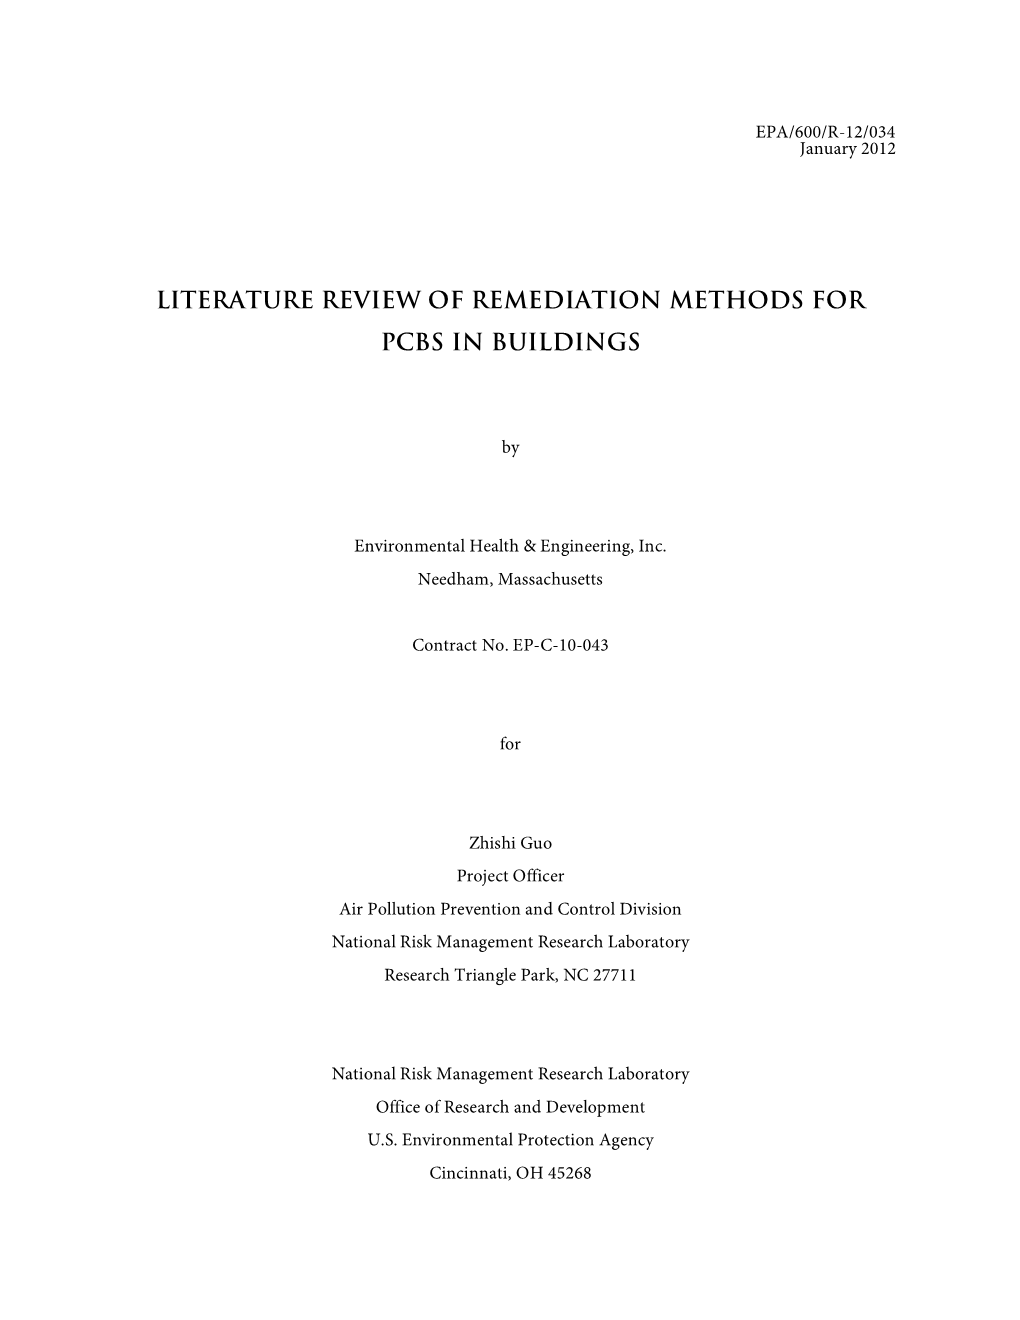 Literature Review of Remediation Methods for Pcbs in Buildings